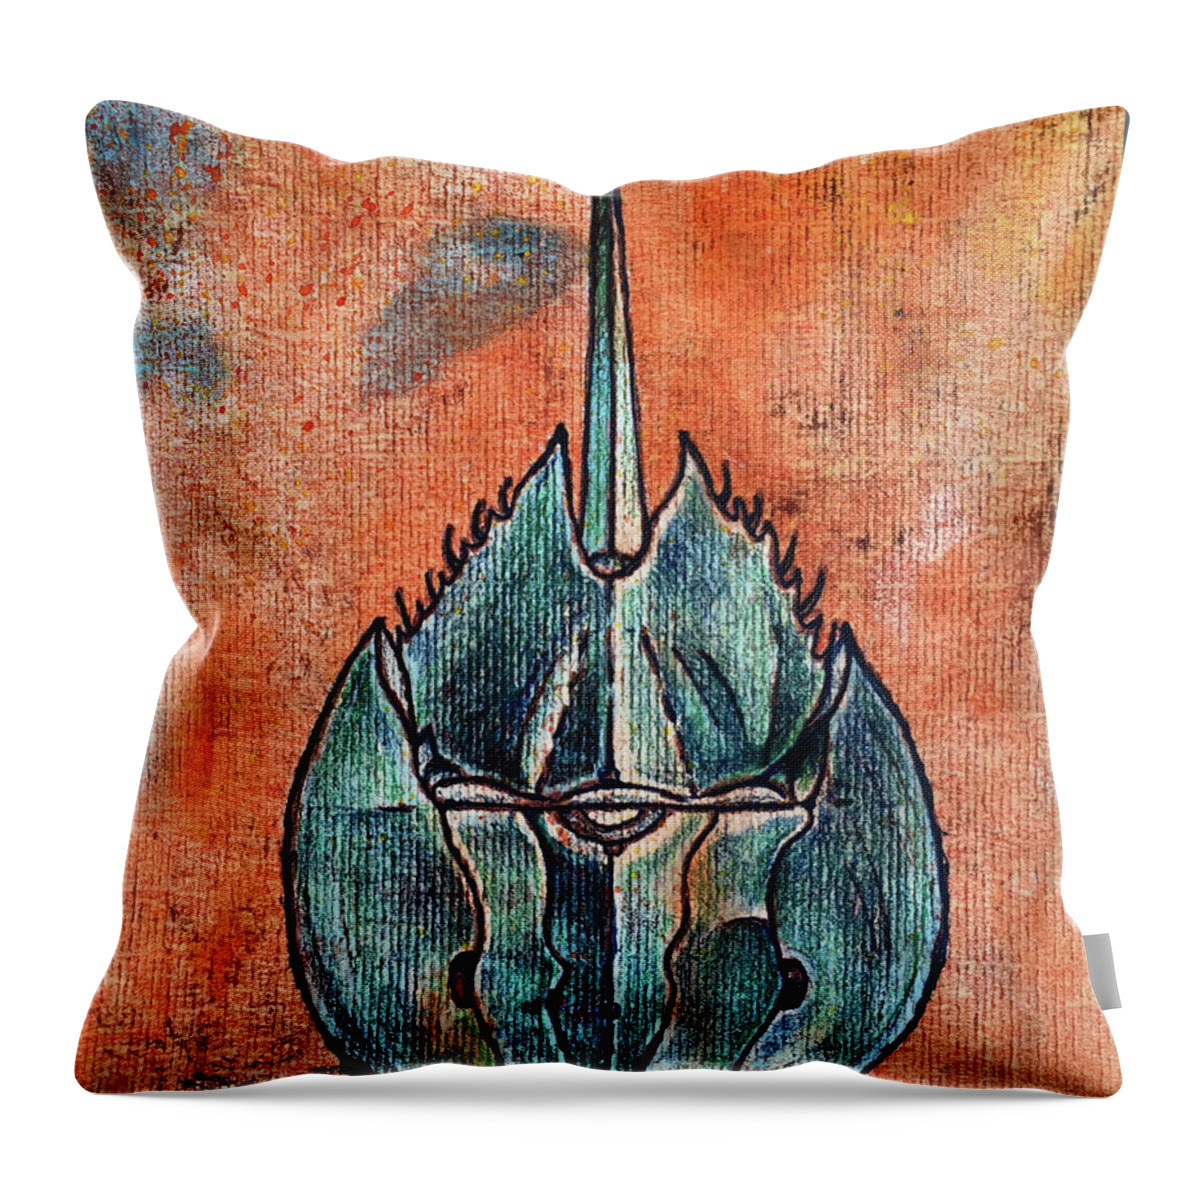 Horseshoe Crab Throw Pillow featuring the mixed media Horseshoe Crab No.3 by AnneMarie Welsh